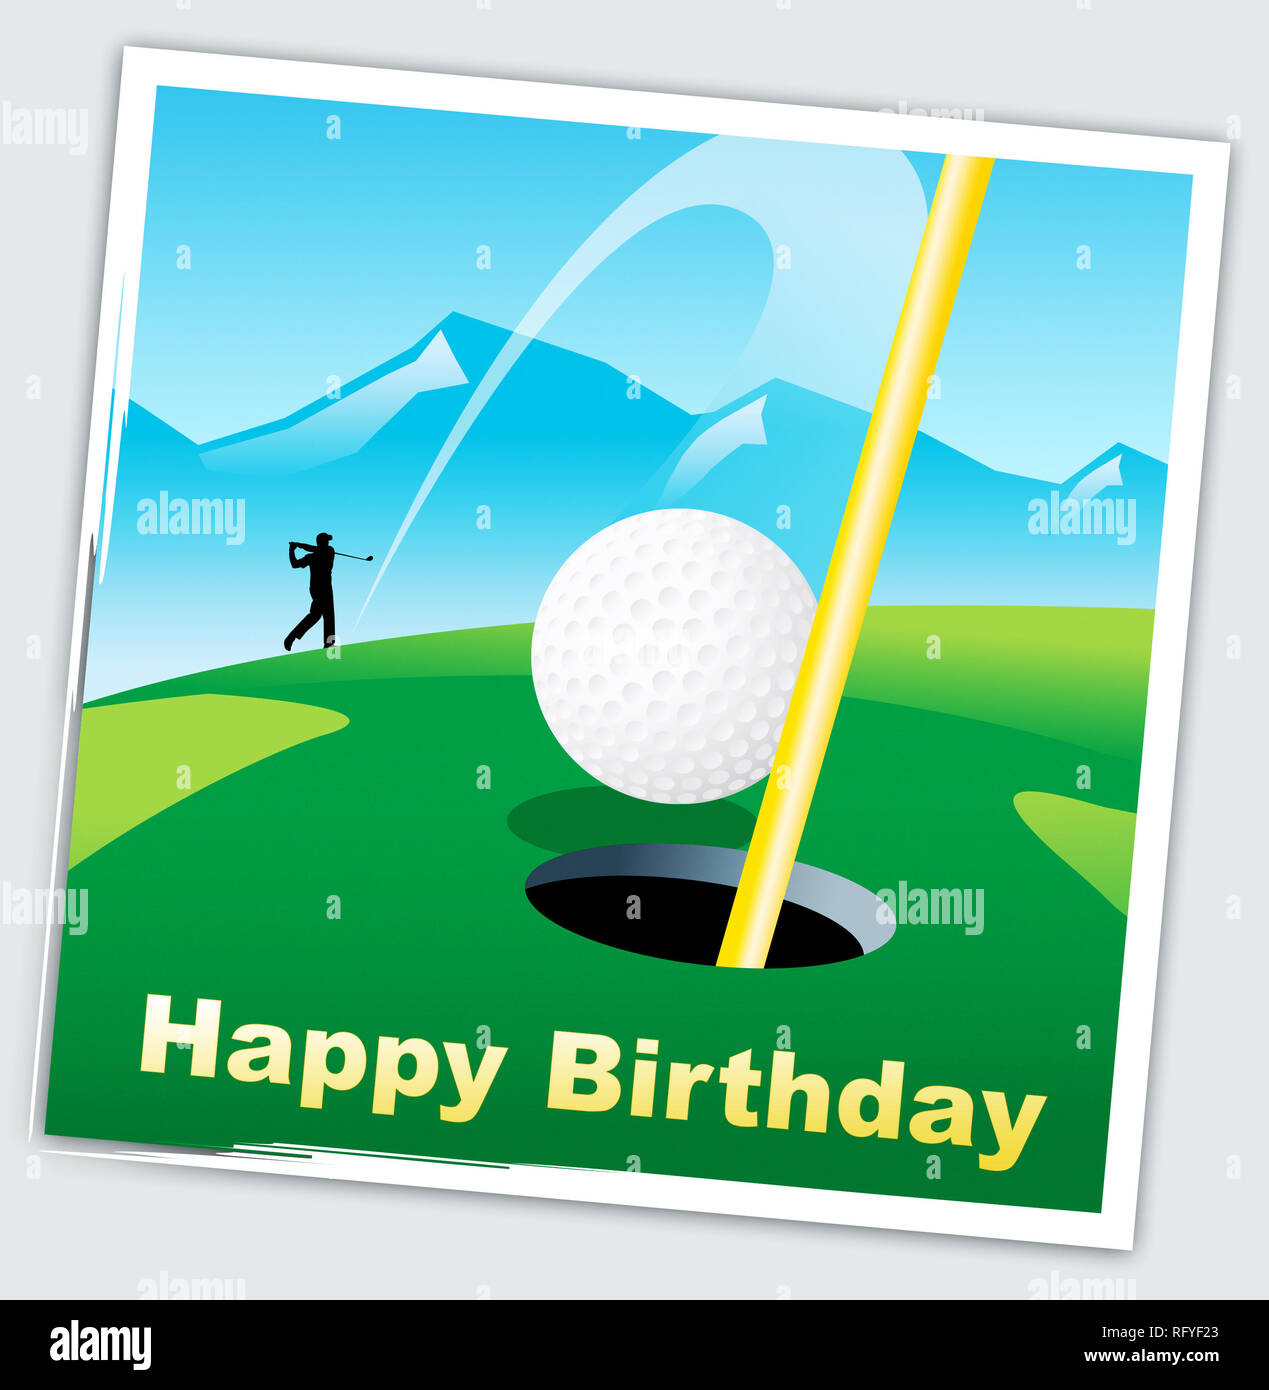 Happy Birthday Golfer Message As Surprise Greeting For Golf Player.  Congrats For Golfing Fanatic - 3d Illustration Stock Photo - Alamy